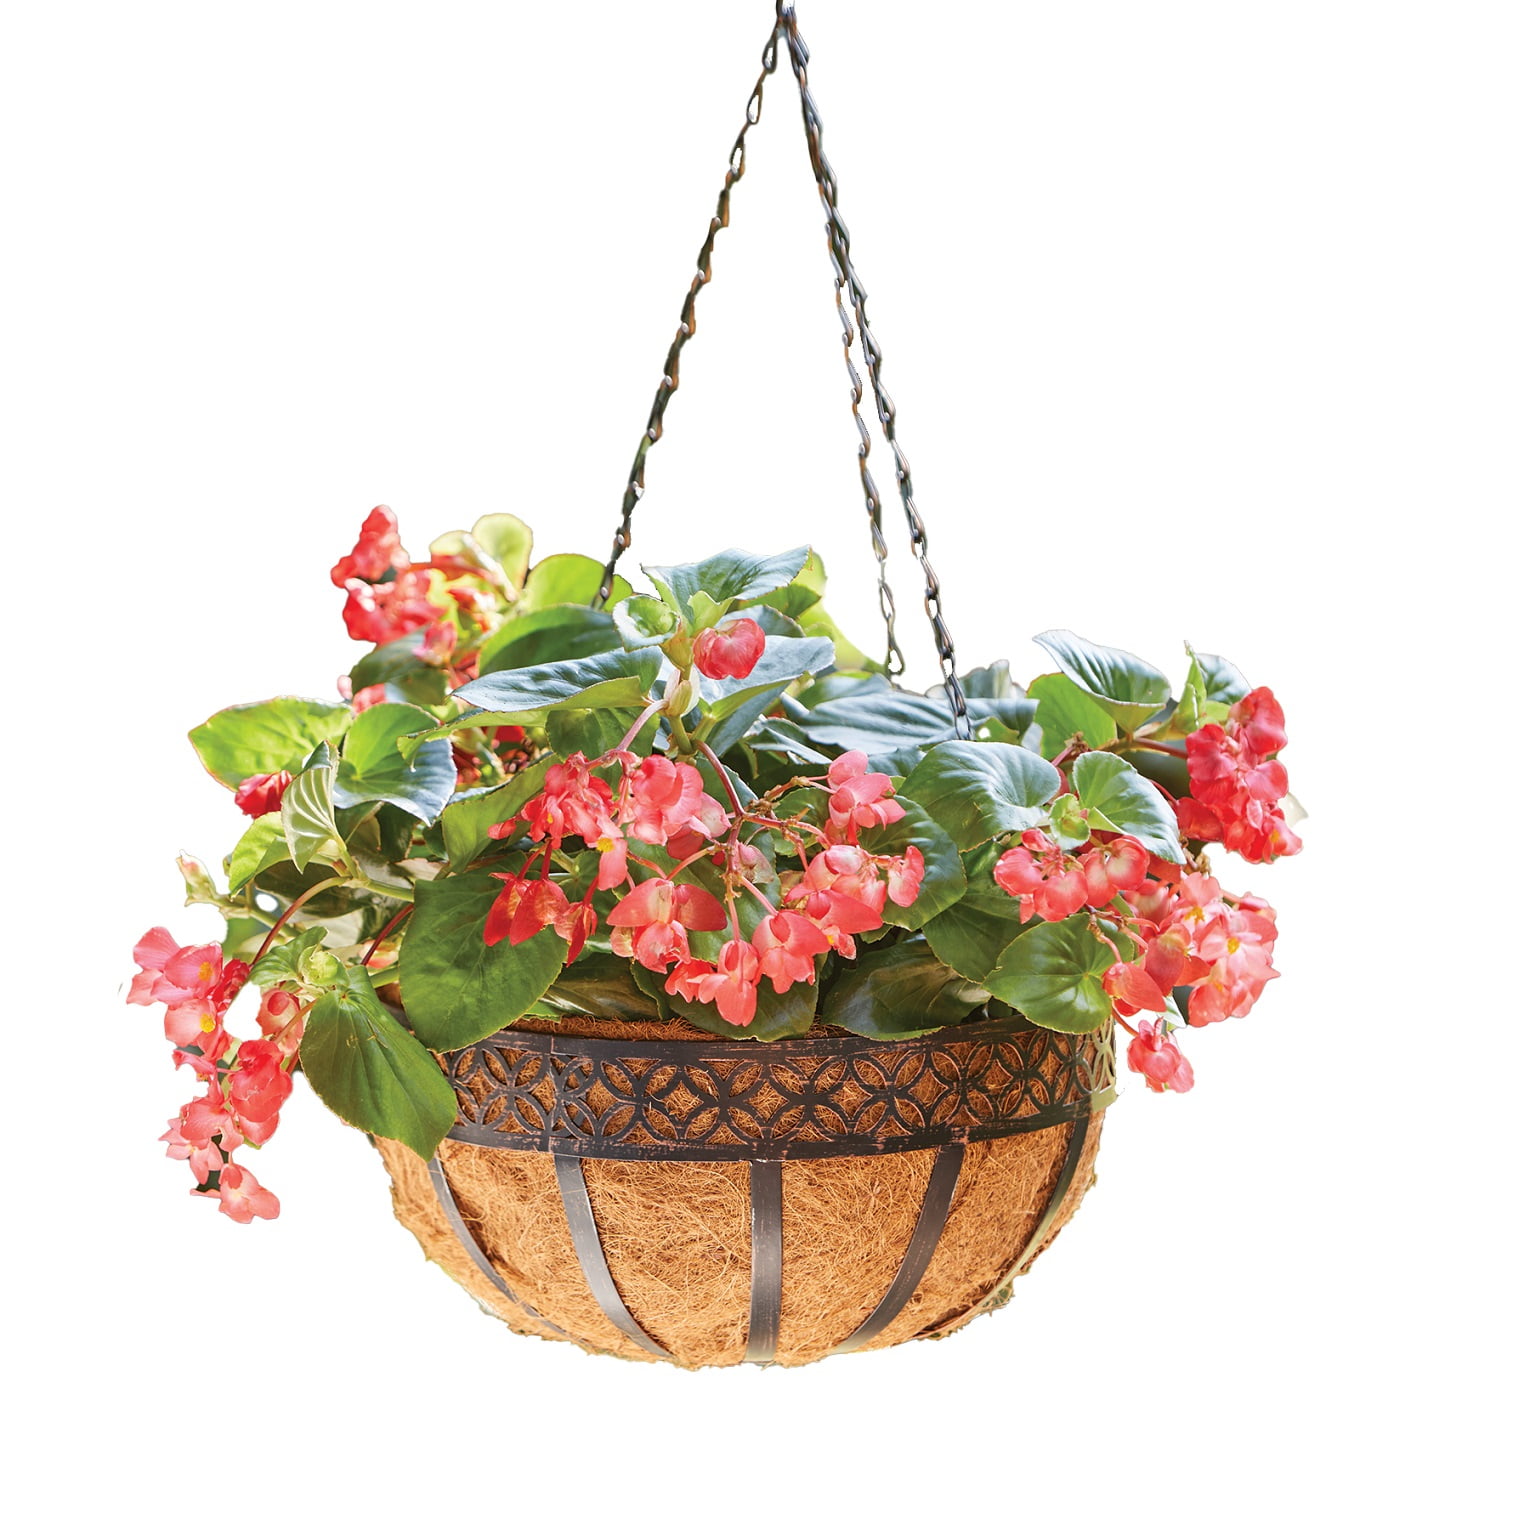 RUSTIC STYLE METAL WIRE HANGING BASKET WITH BIRD ON THE SIDE GARDEN OUTDOORS 